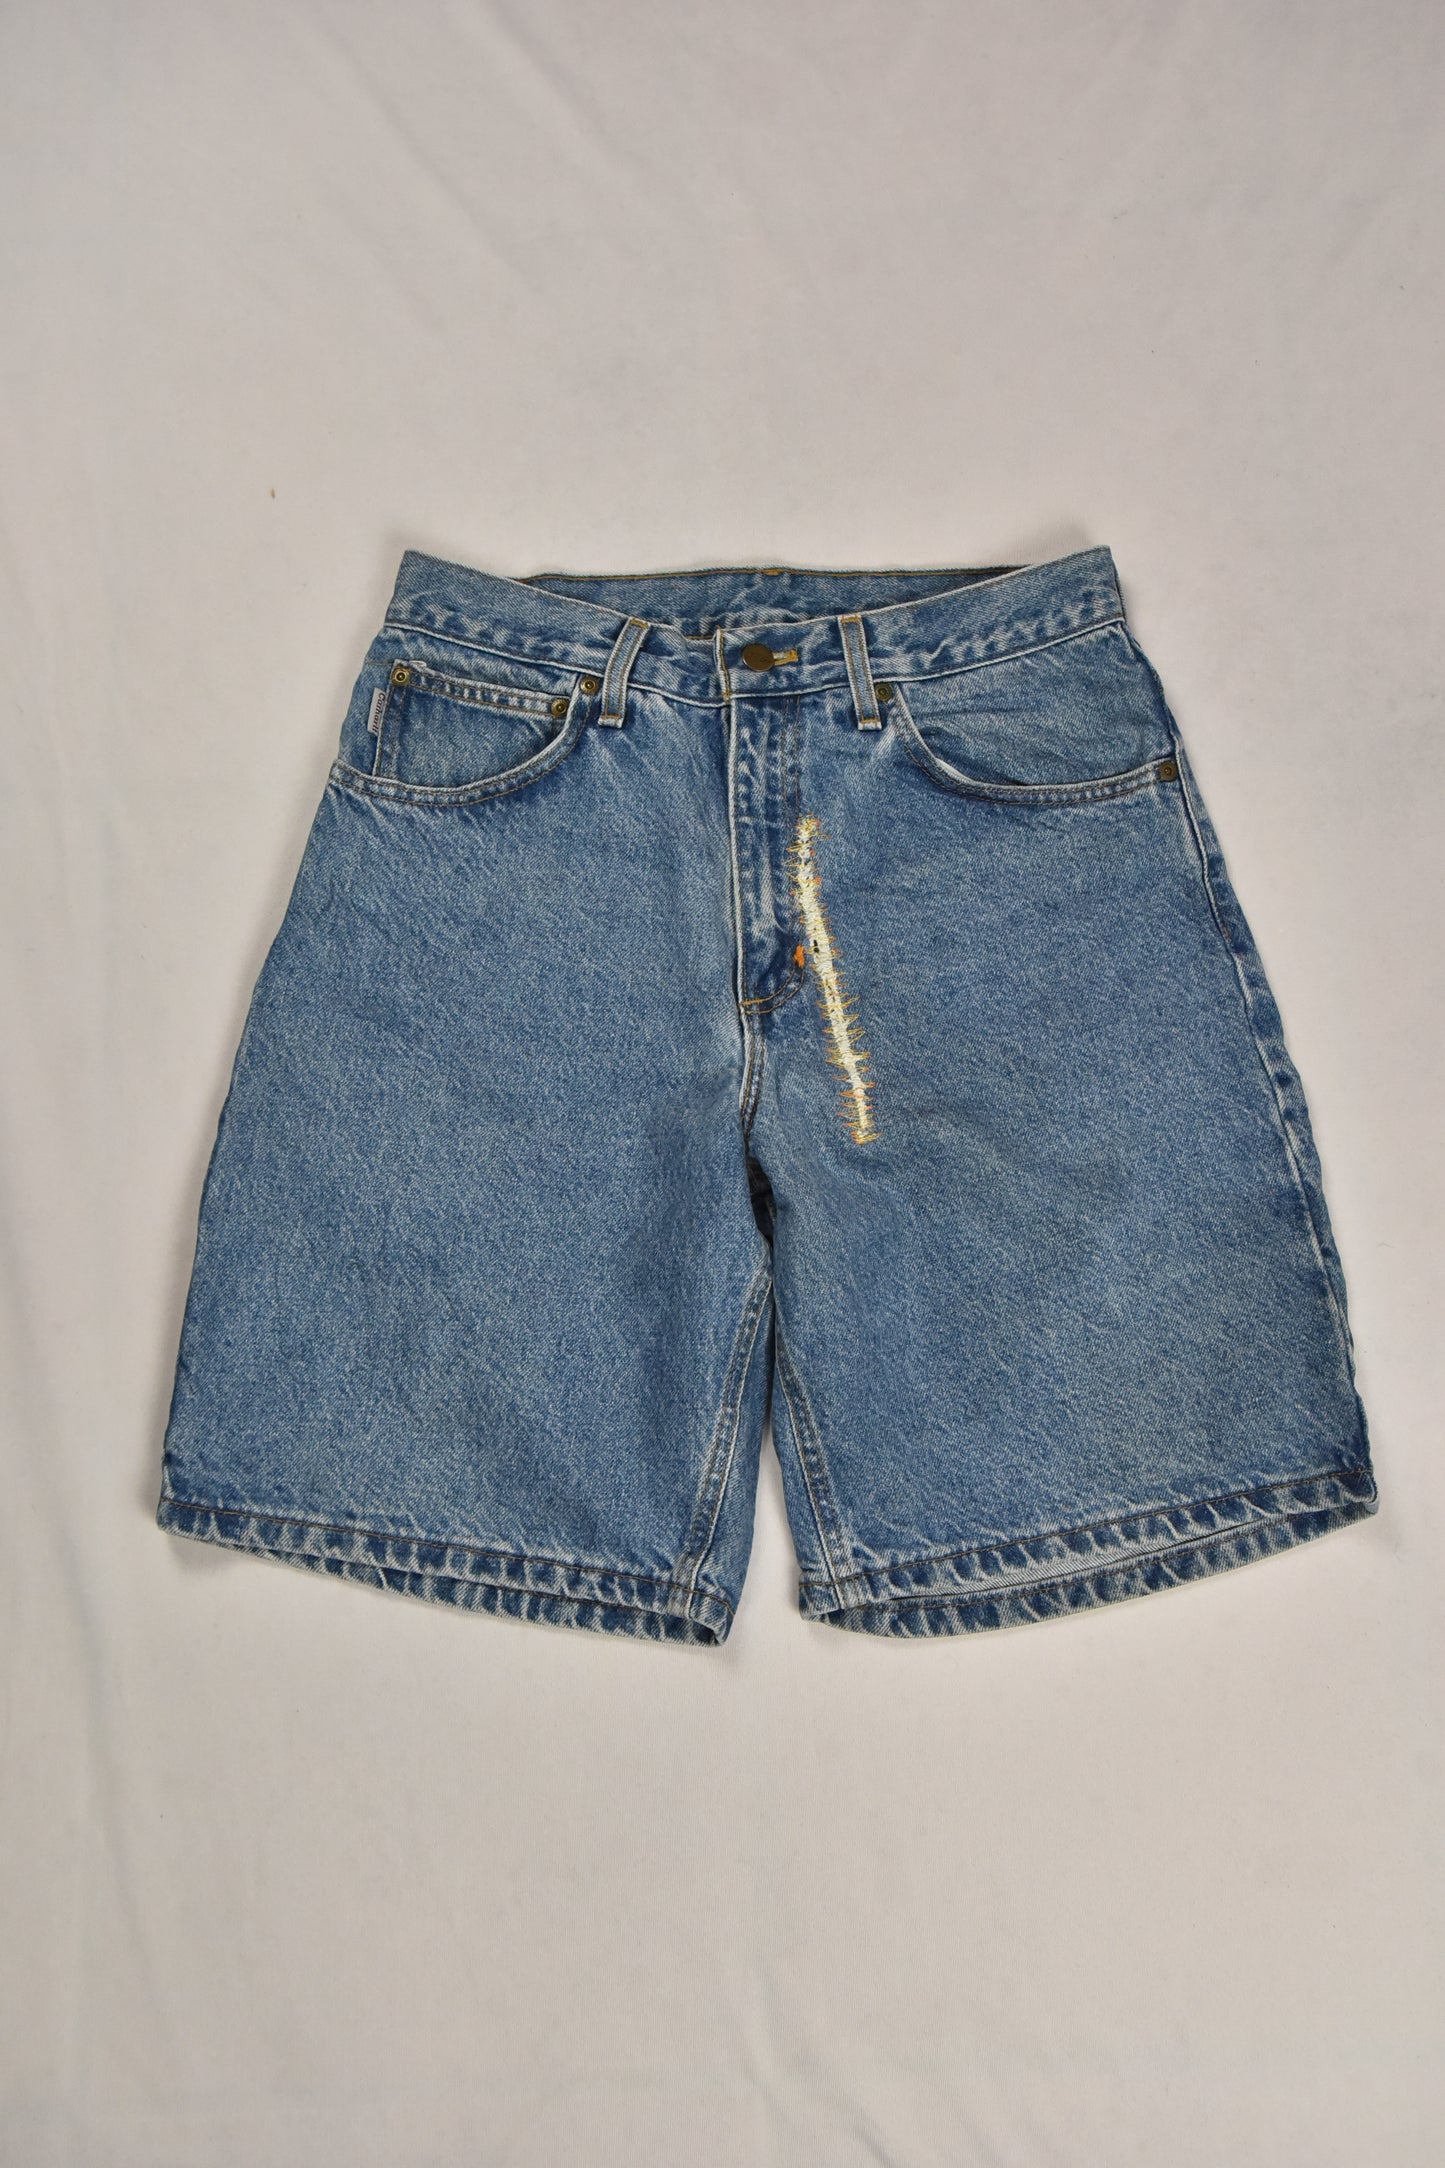 Carhartt Short Jeans Made in USA Vintage / 31